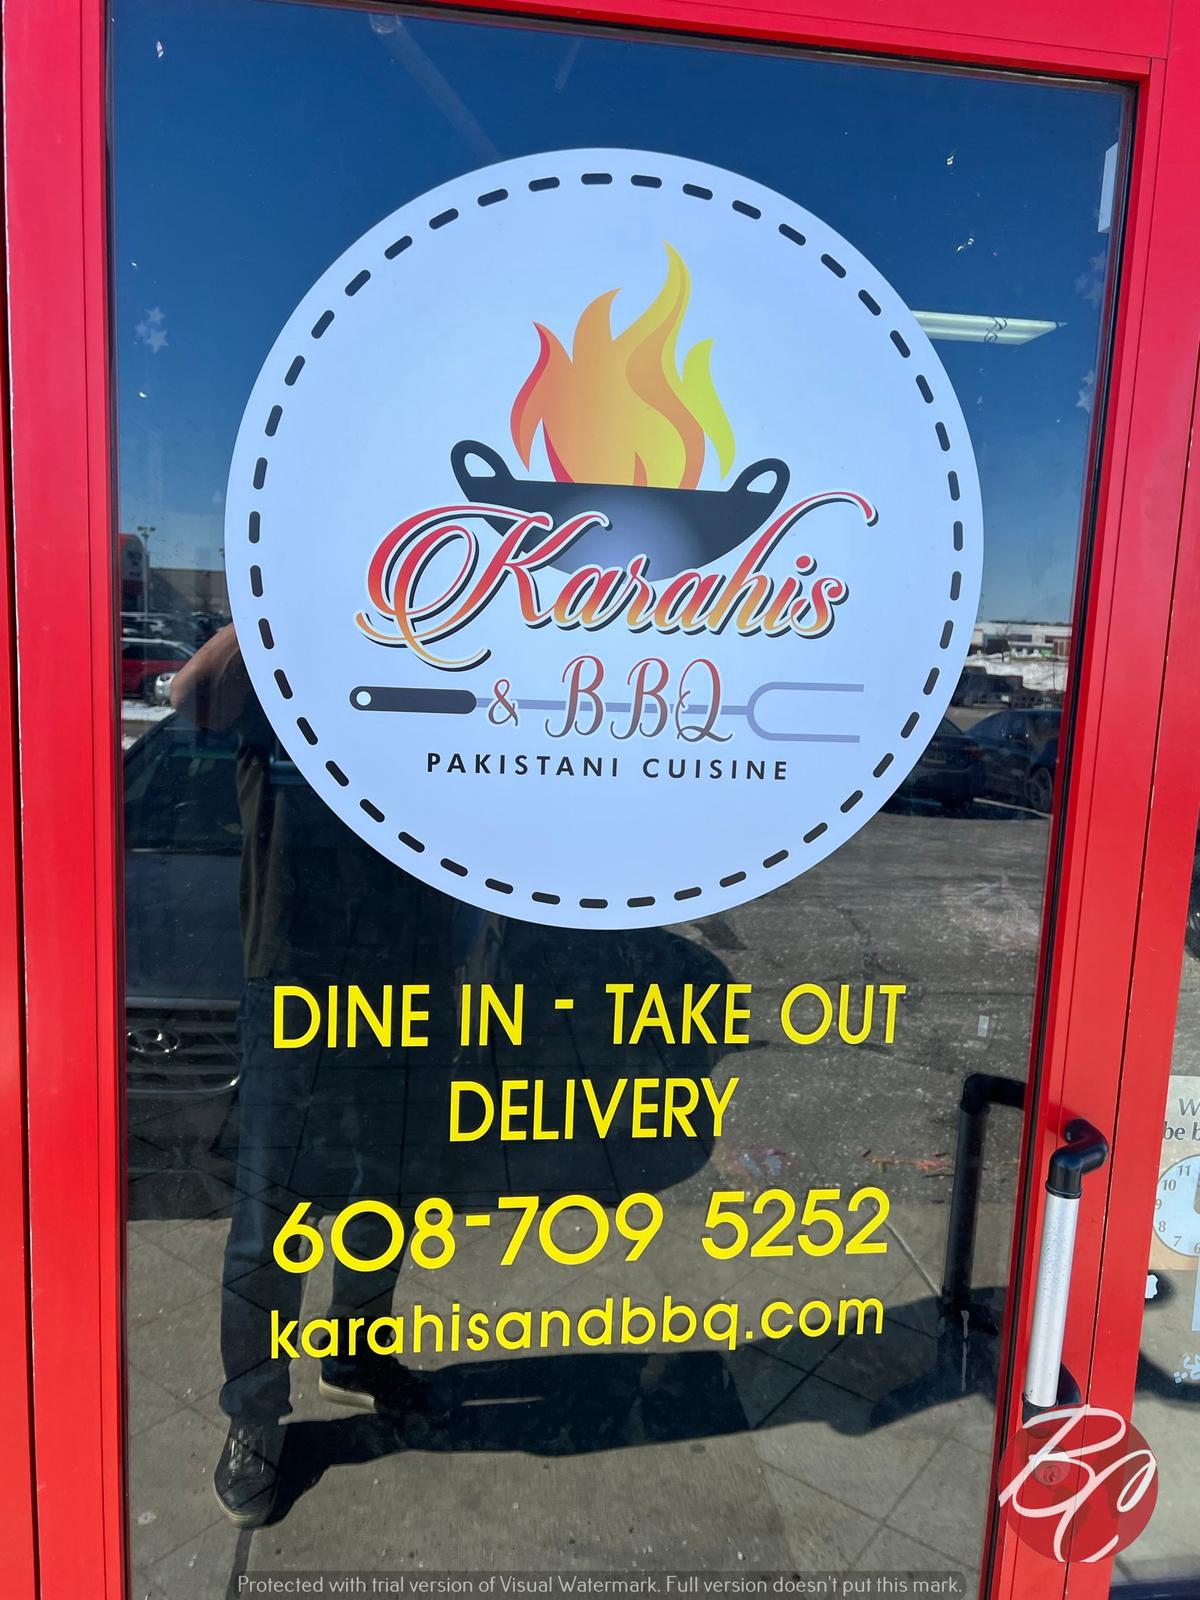 Karahis & BBQ Is A Premier And Authentic Indo-Pakistani Restaurant